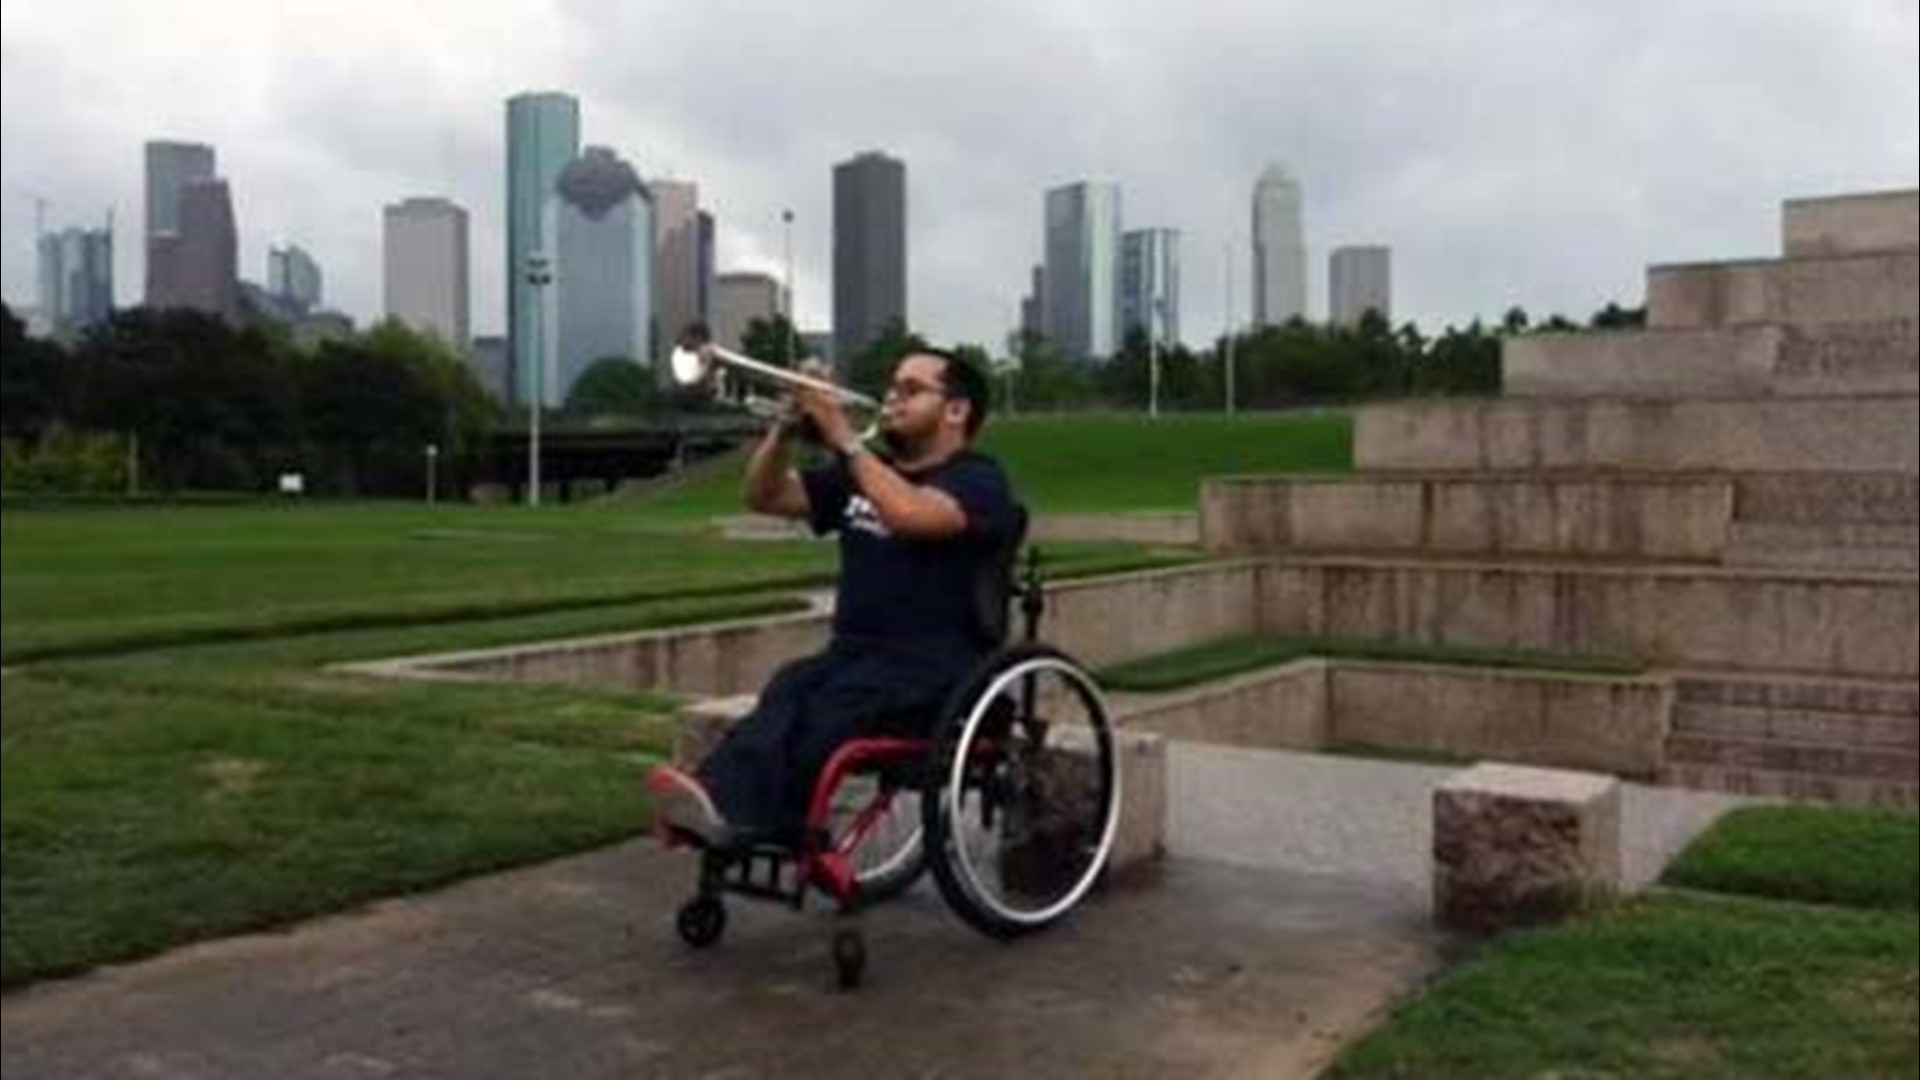 Deep Steel Thunder,the official band of the Houston Texans, participated inTaps Across America for Memorial Day.
Credit: Aaron Williams